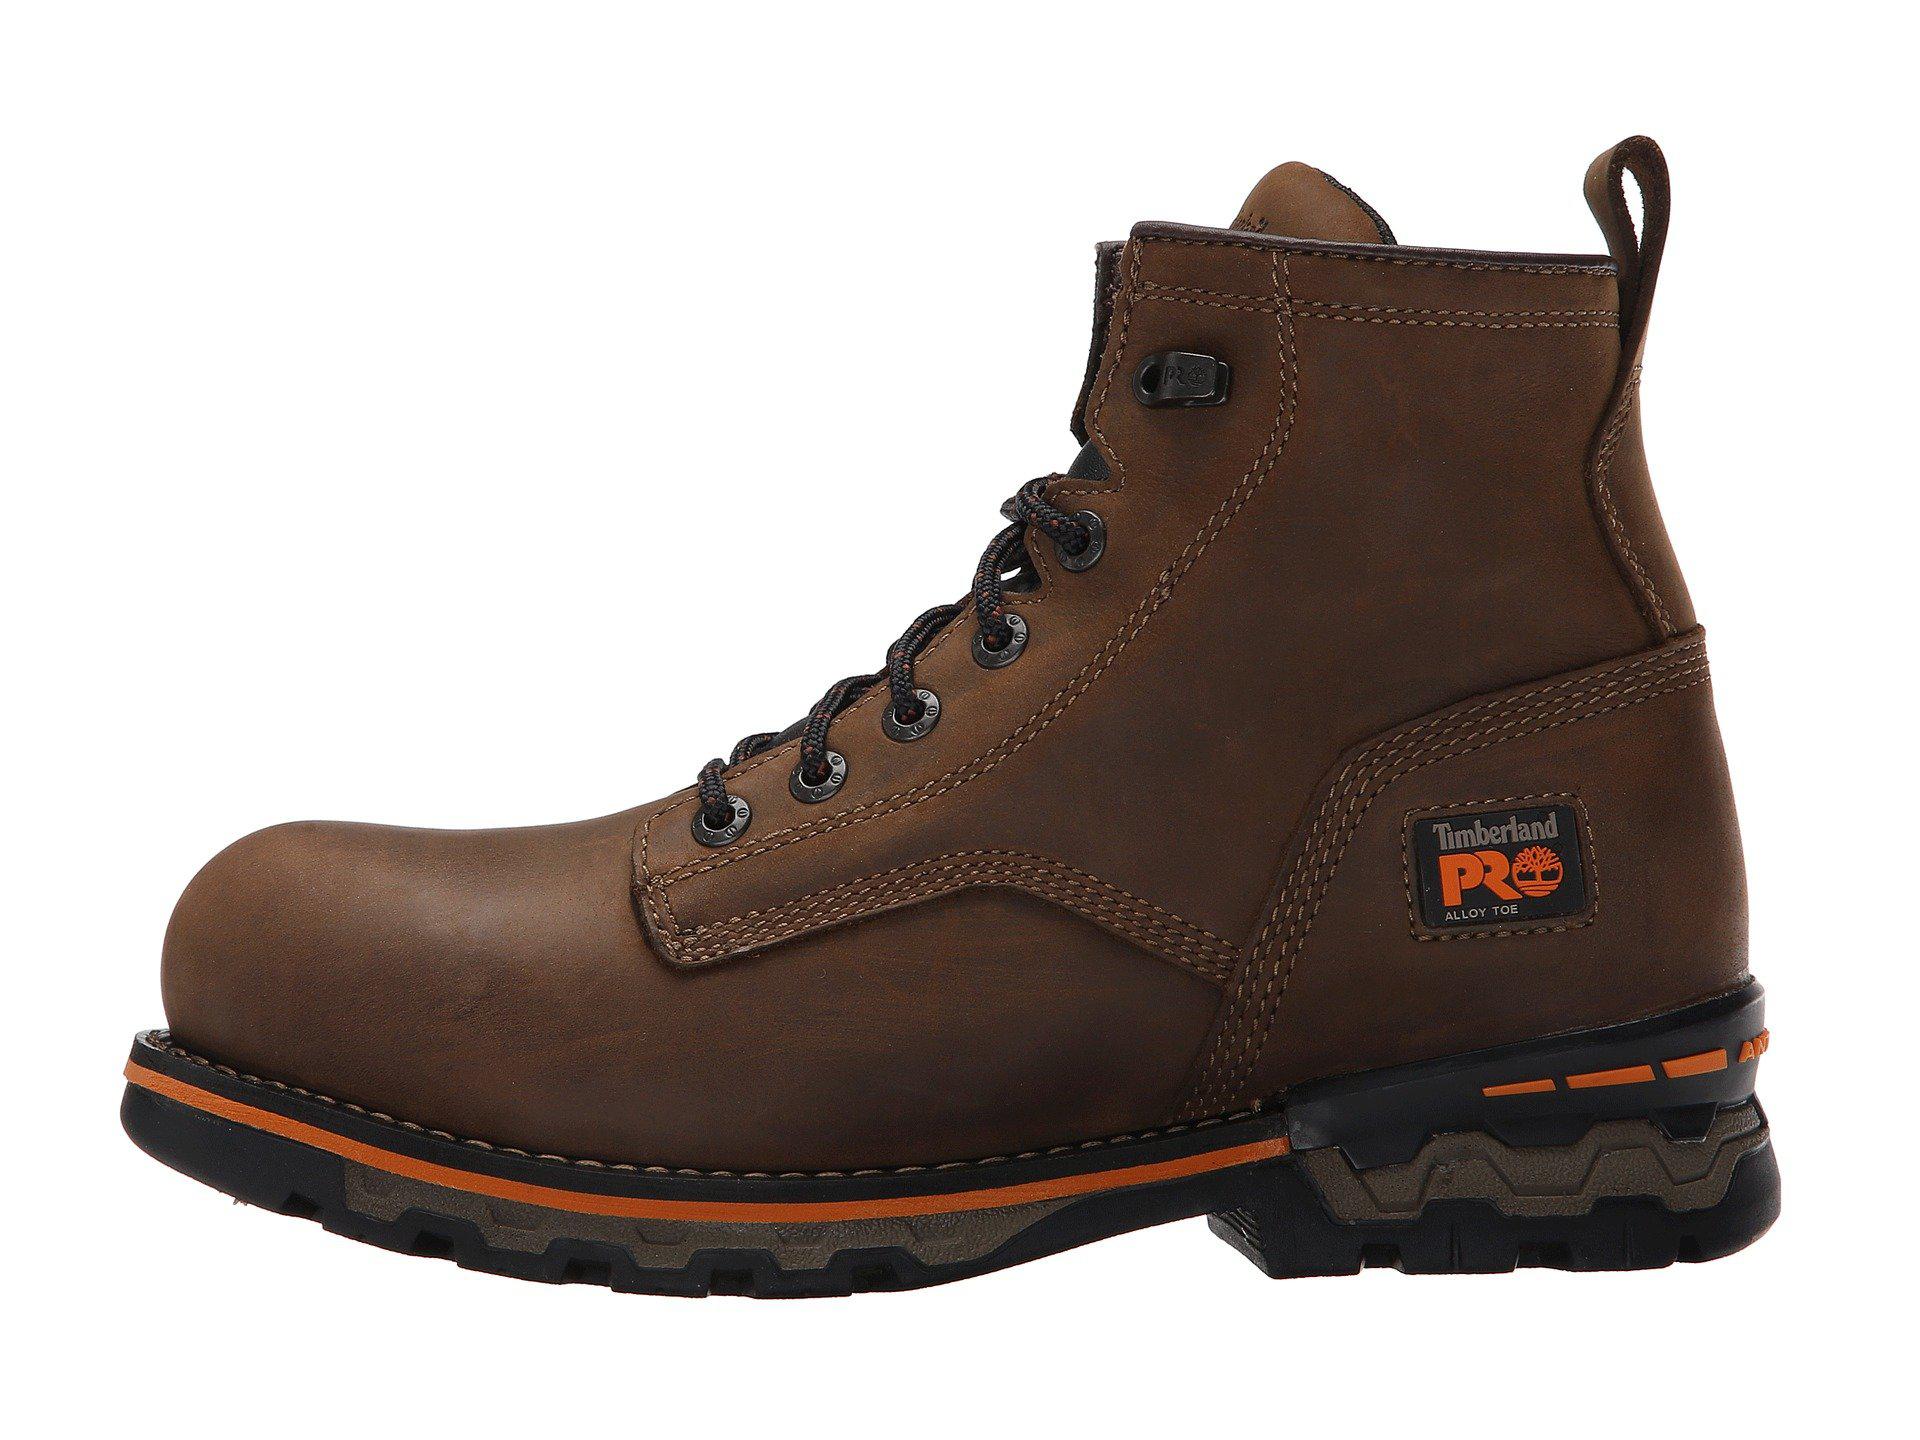 Timberland Ag Boss Alloy Safety Toe Waterproof Unlined Boot in Brown ...